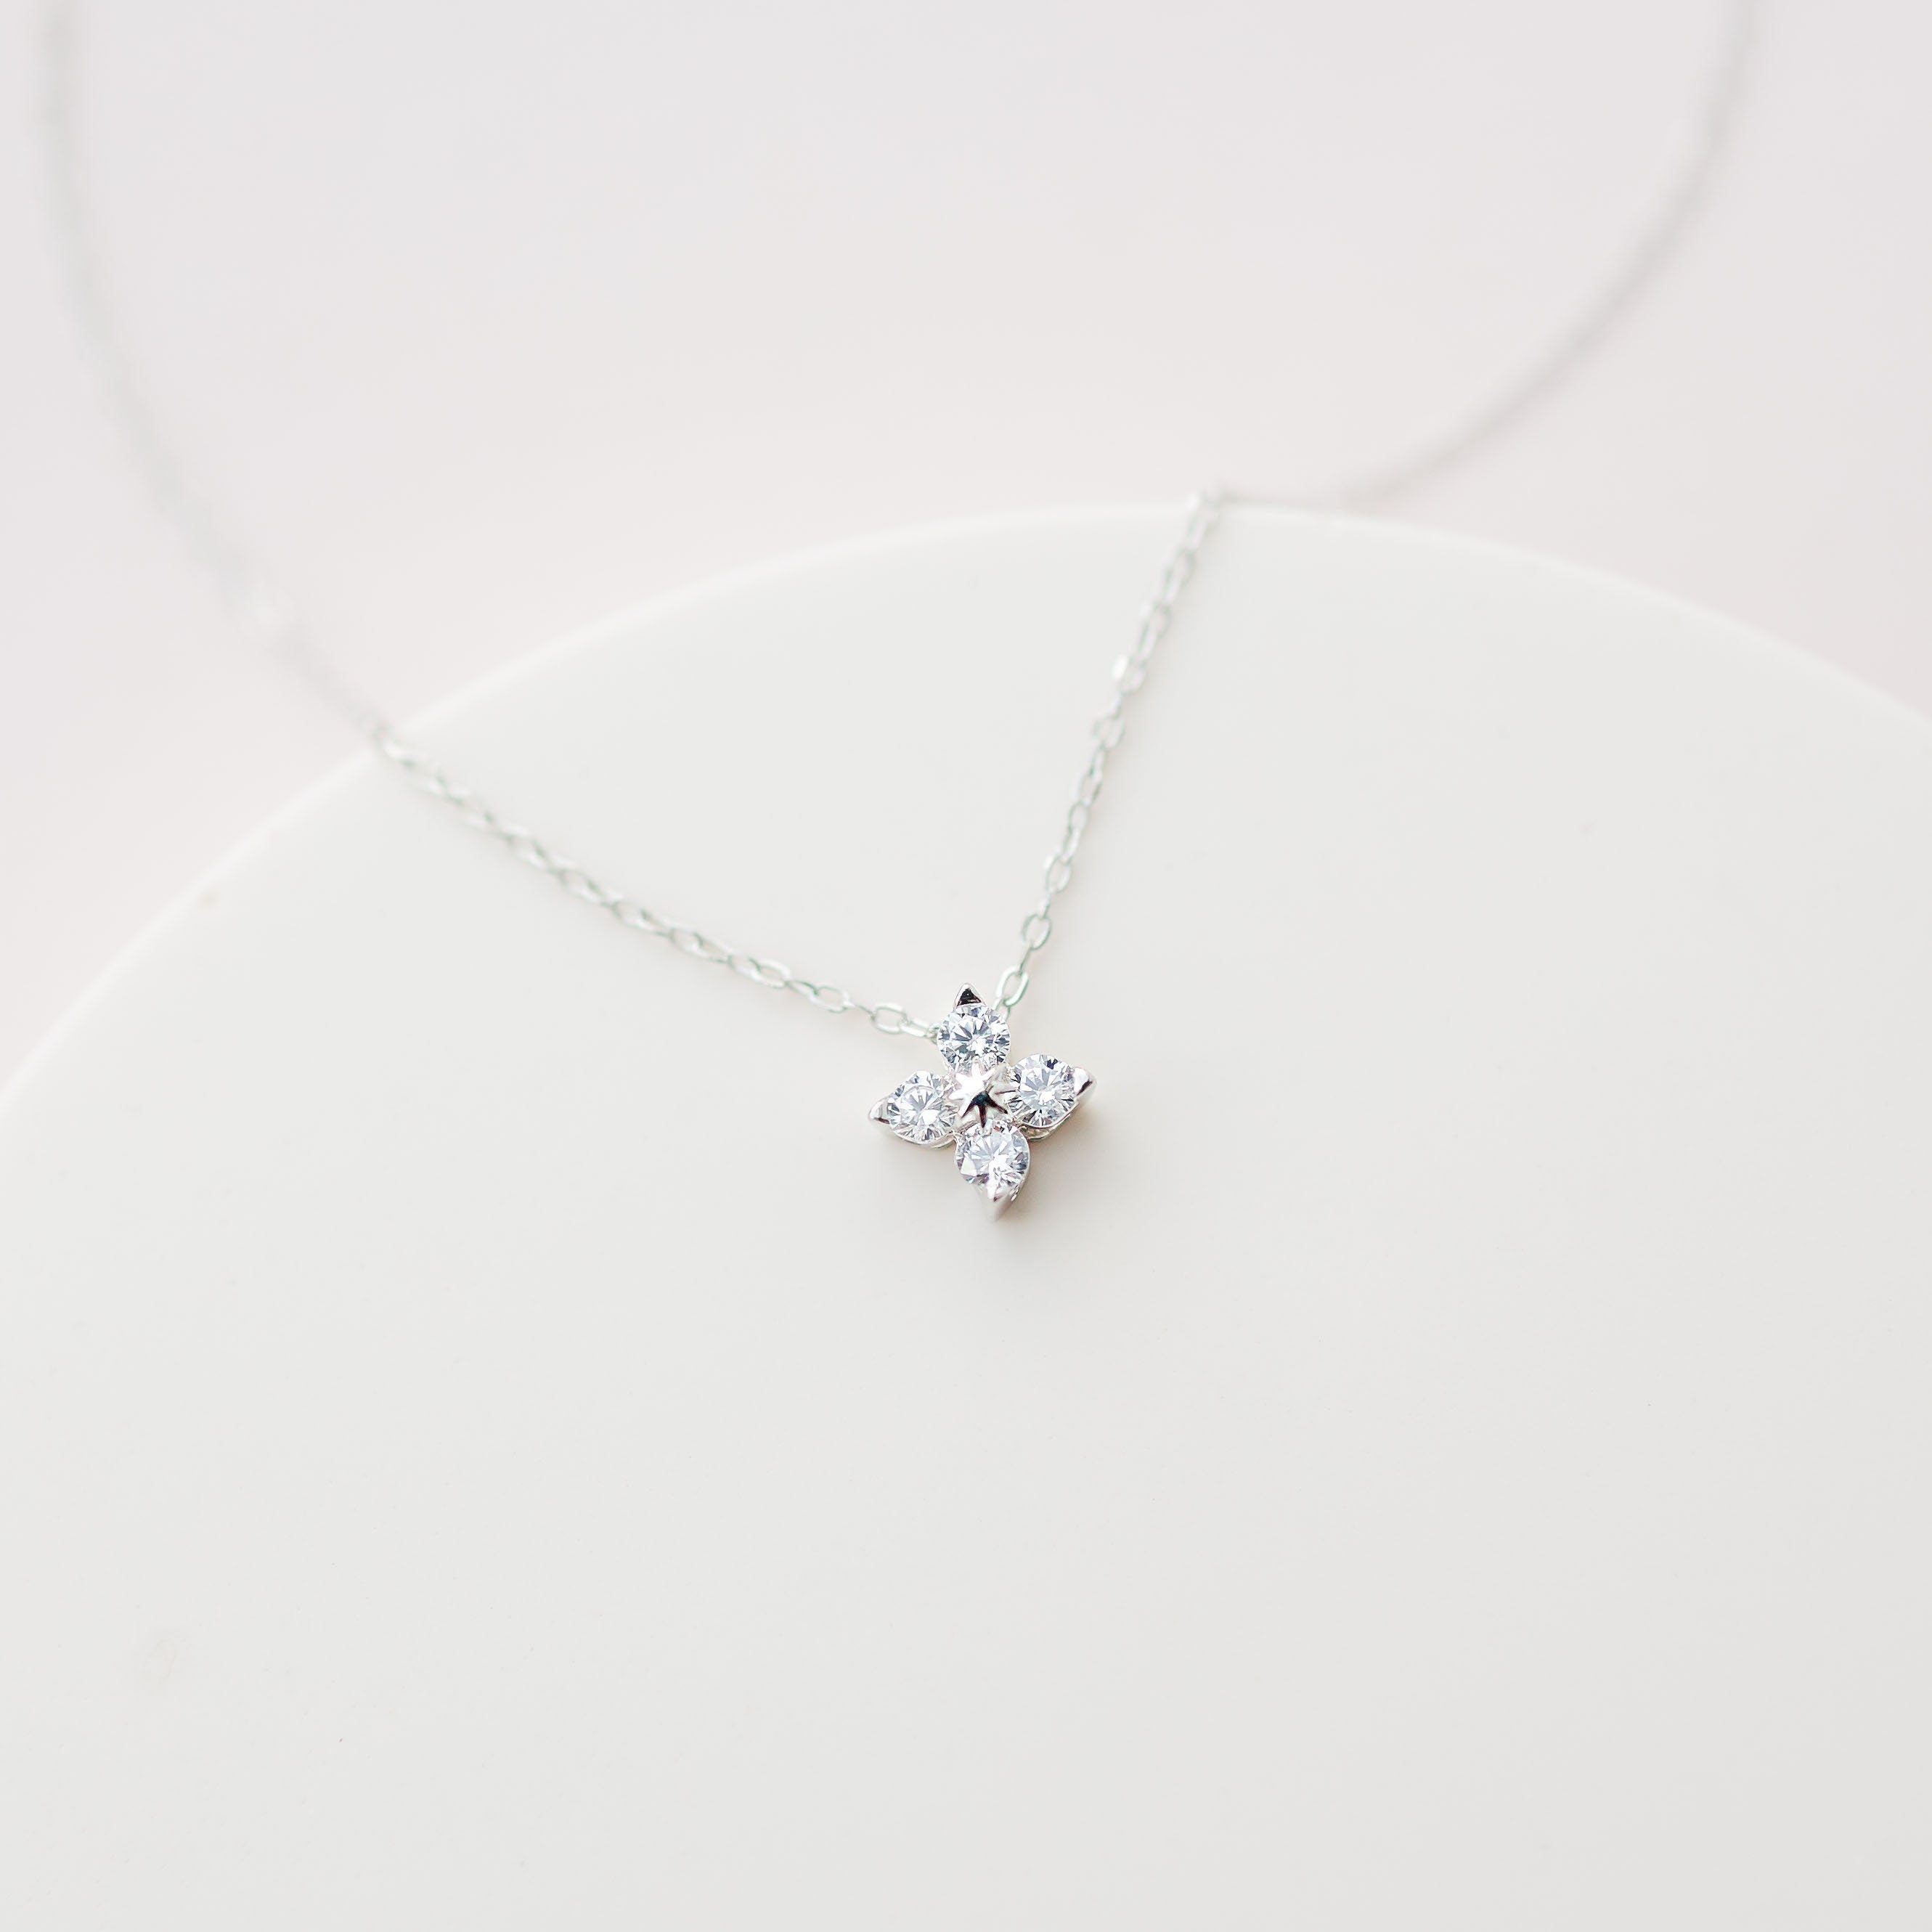 CHLOE // Dainty silver floral necklace